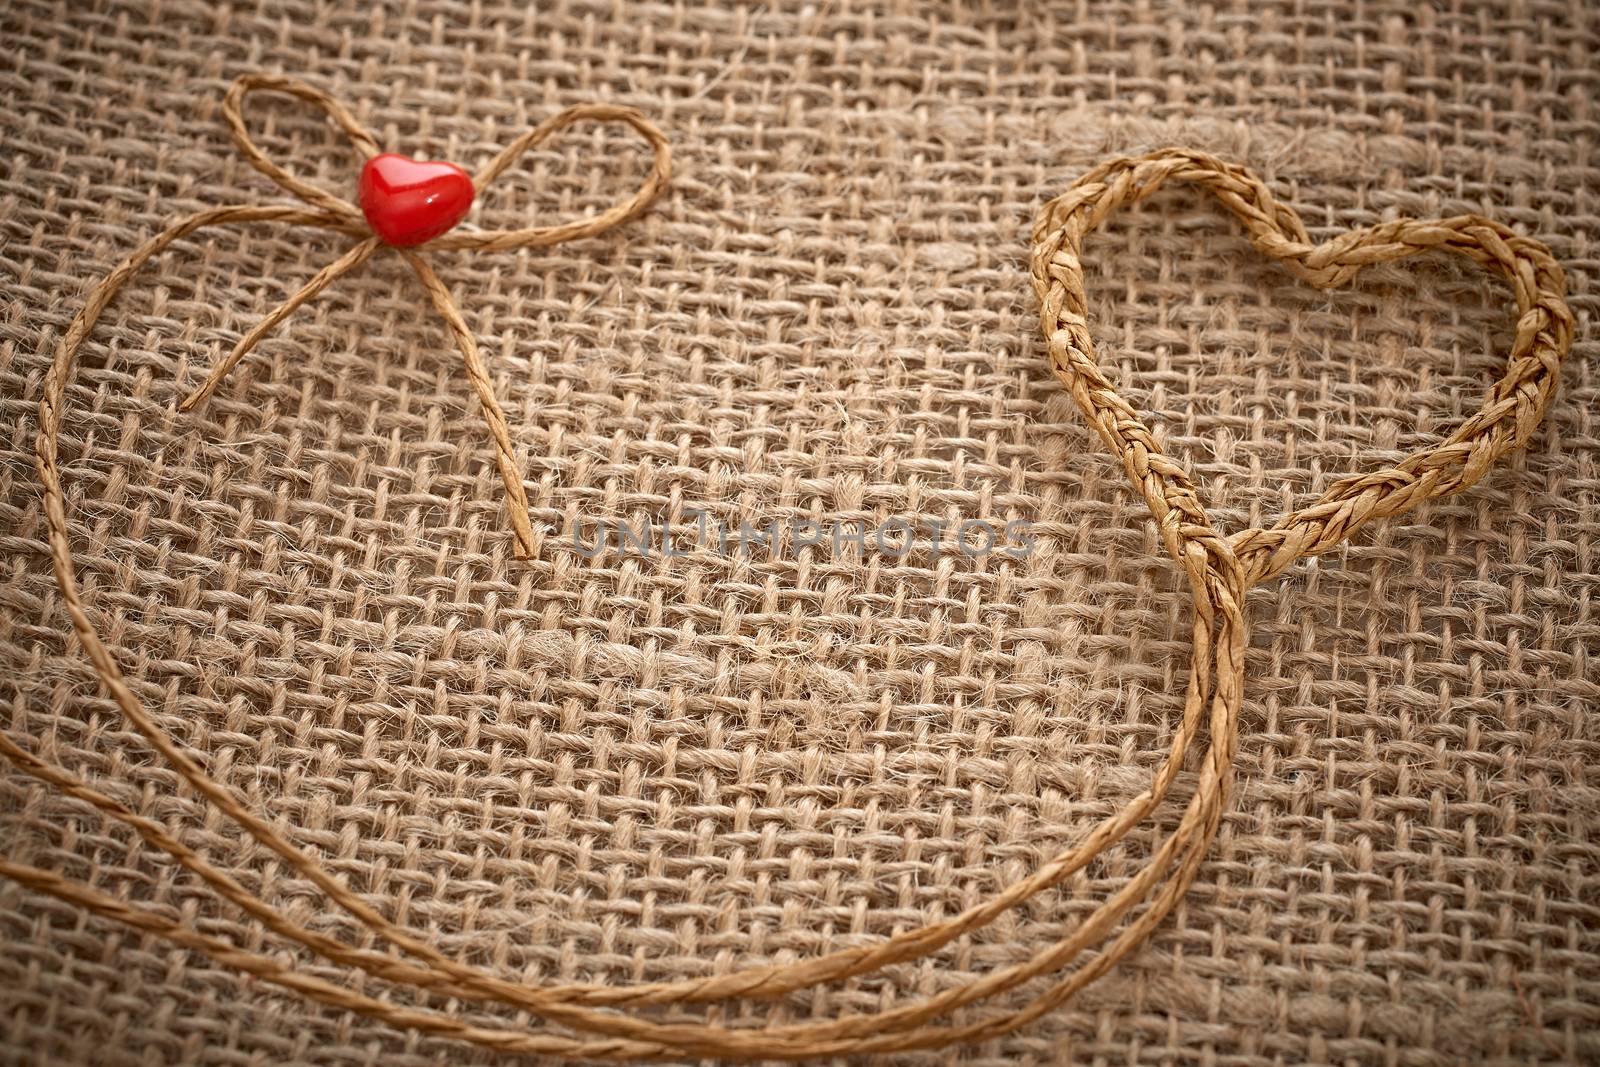 Love hearts, Valentines Day. Heart handmade, made of twine on sackcloth.  Vintage romantic style creative unusual greeting card, copyspace